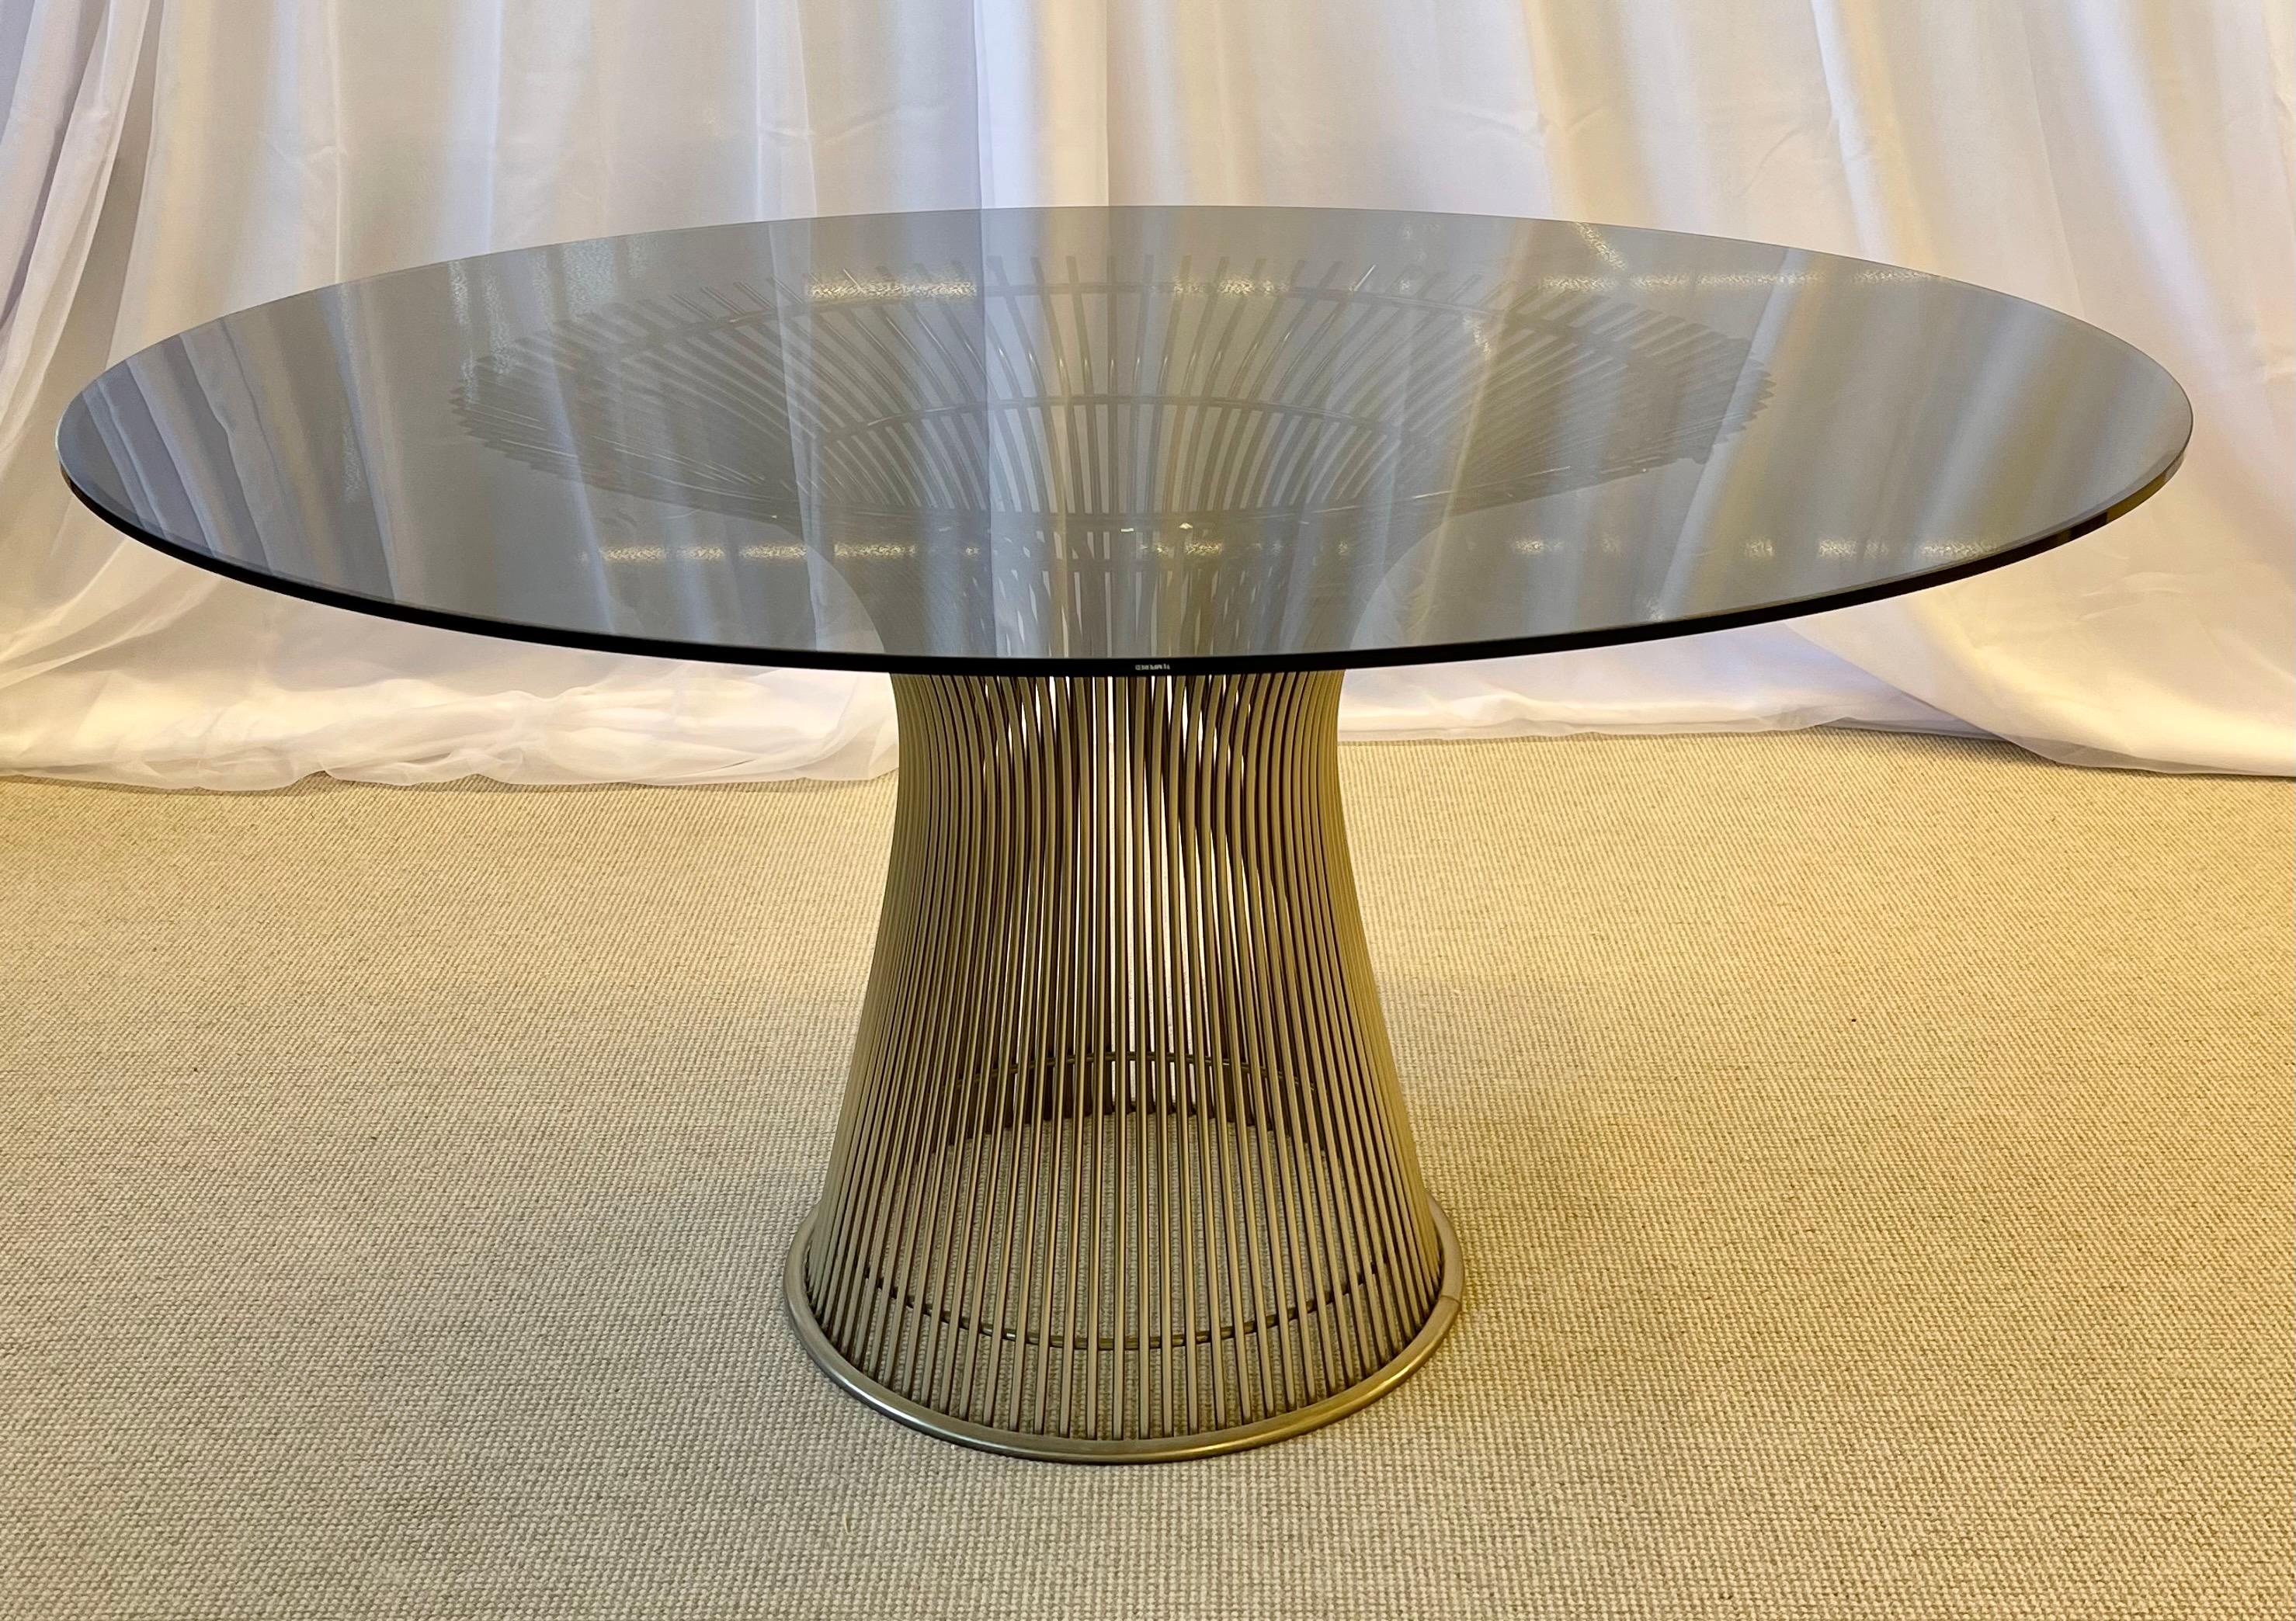 20th Century Warren Platner for Knoll Dining Table & Two Chairs, Vintage Signed